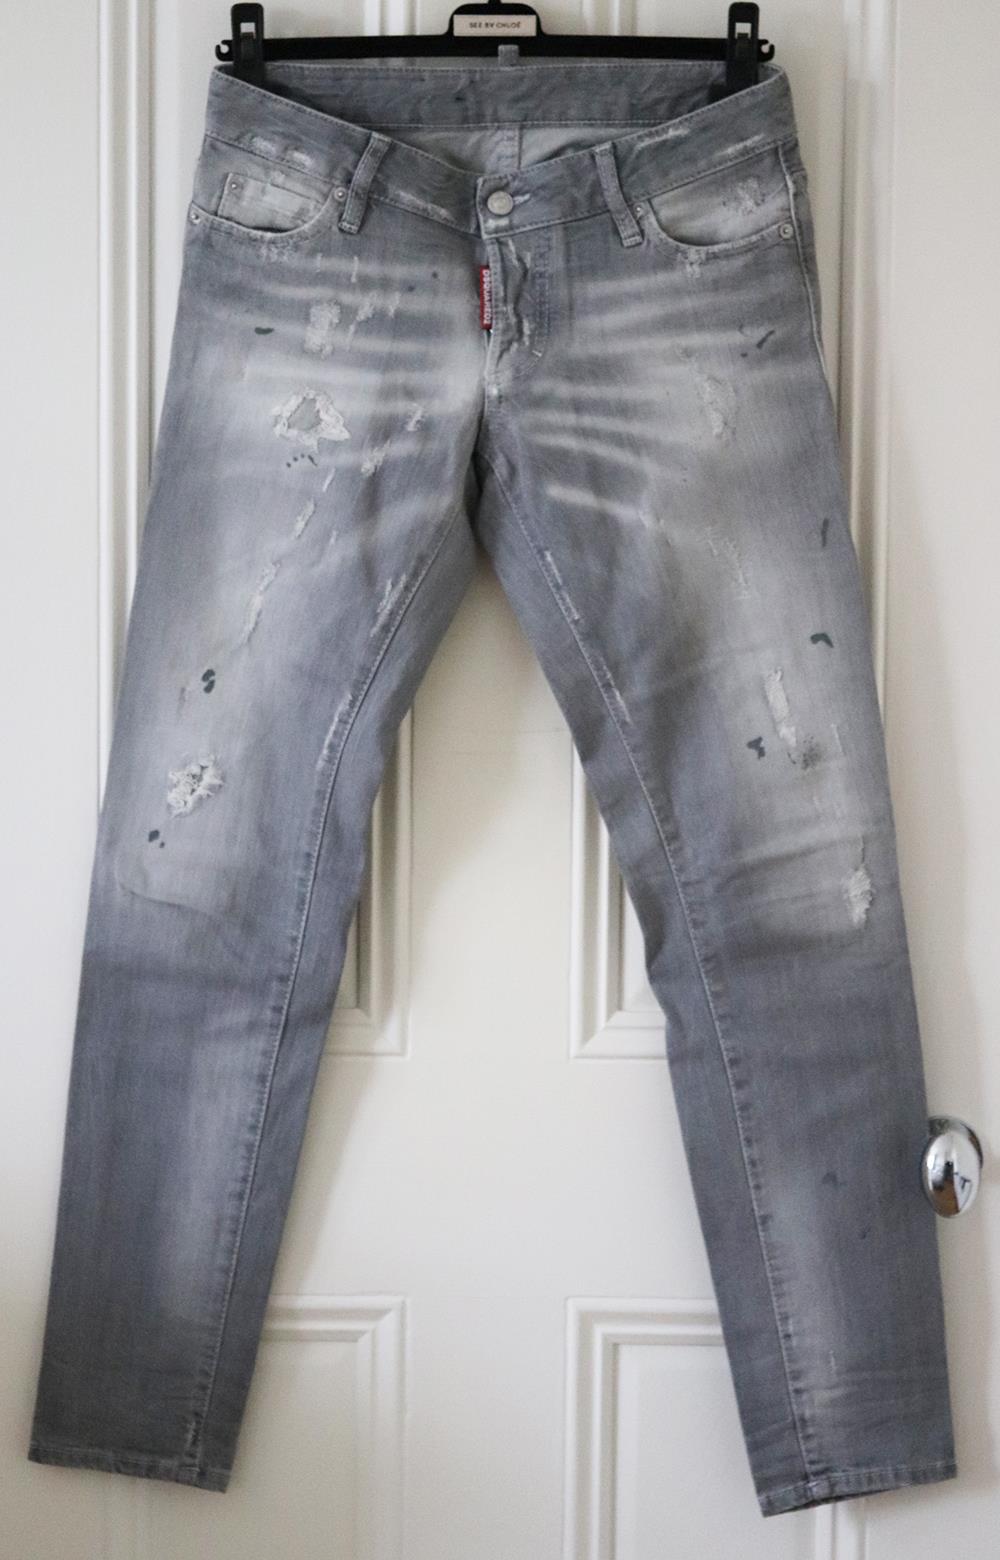 DSQUARED2 DISTRESSED LOW RISE SKINNY JEANS IT 38 UK 6